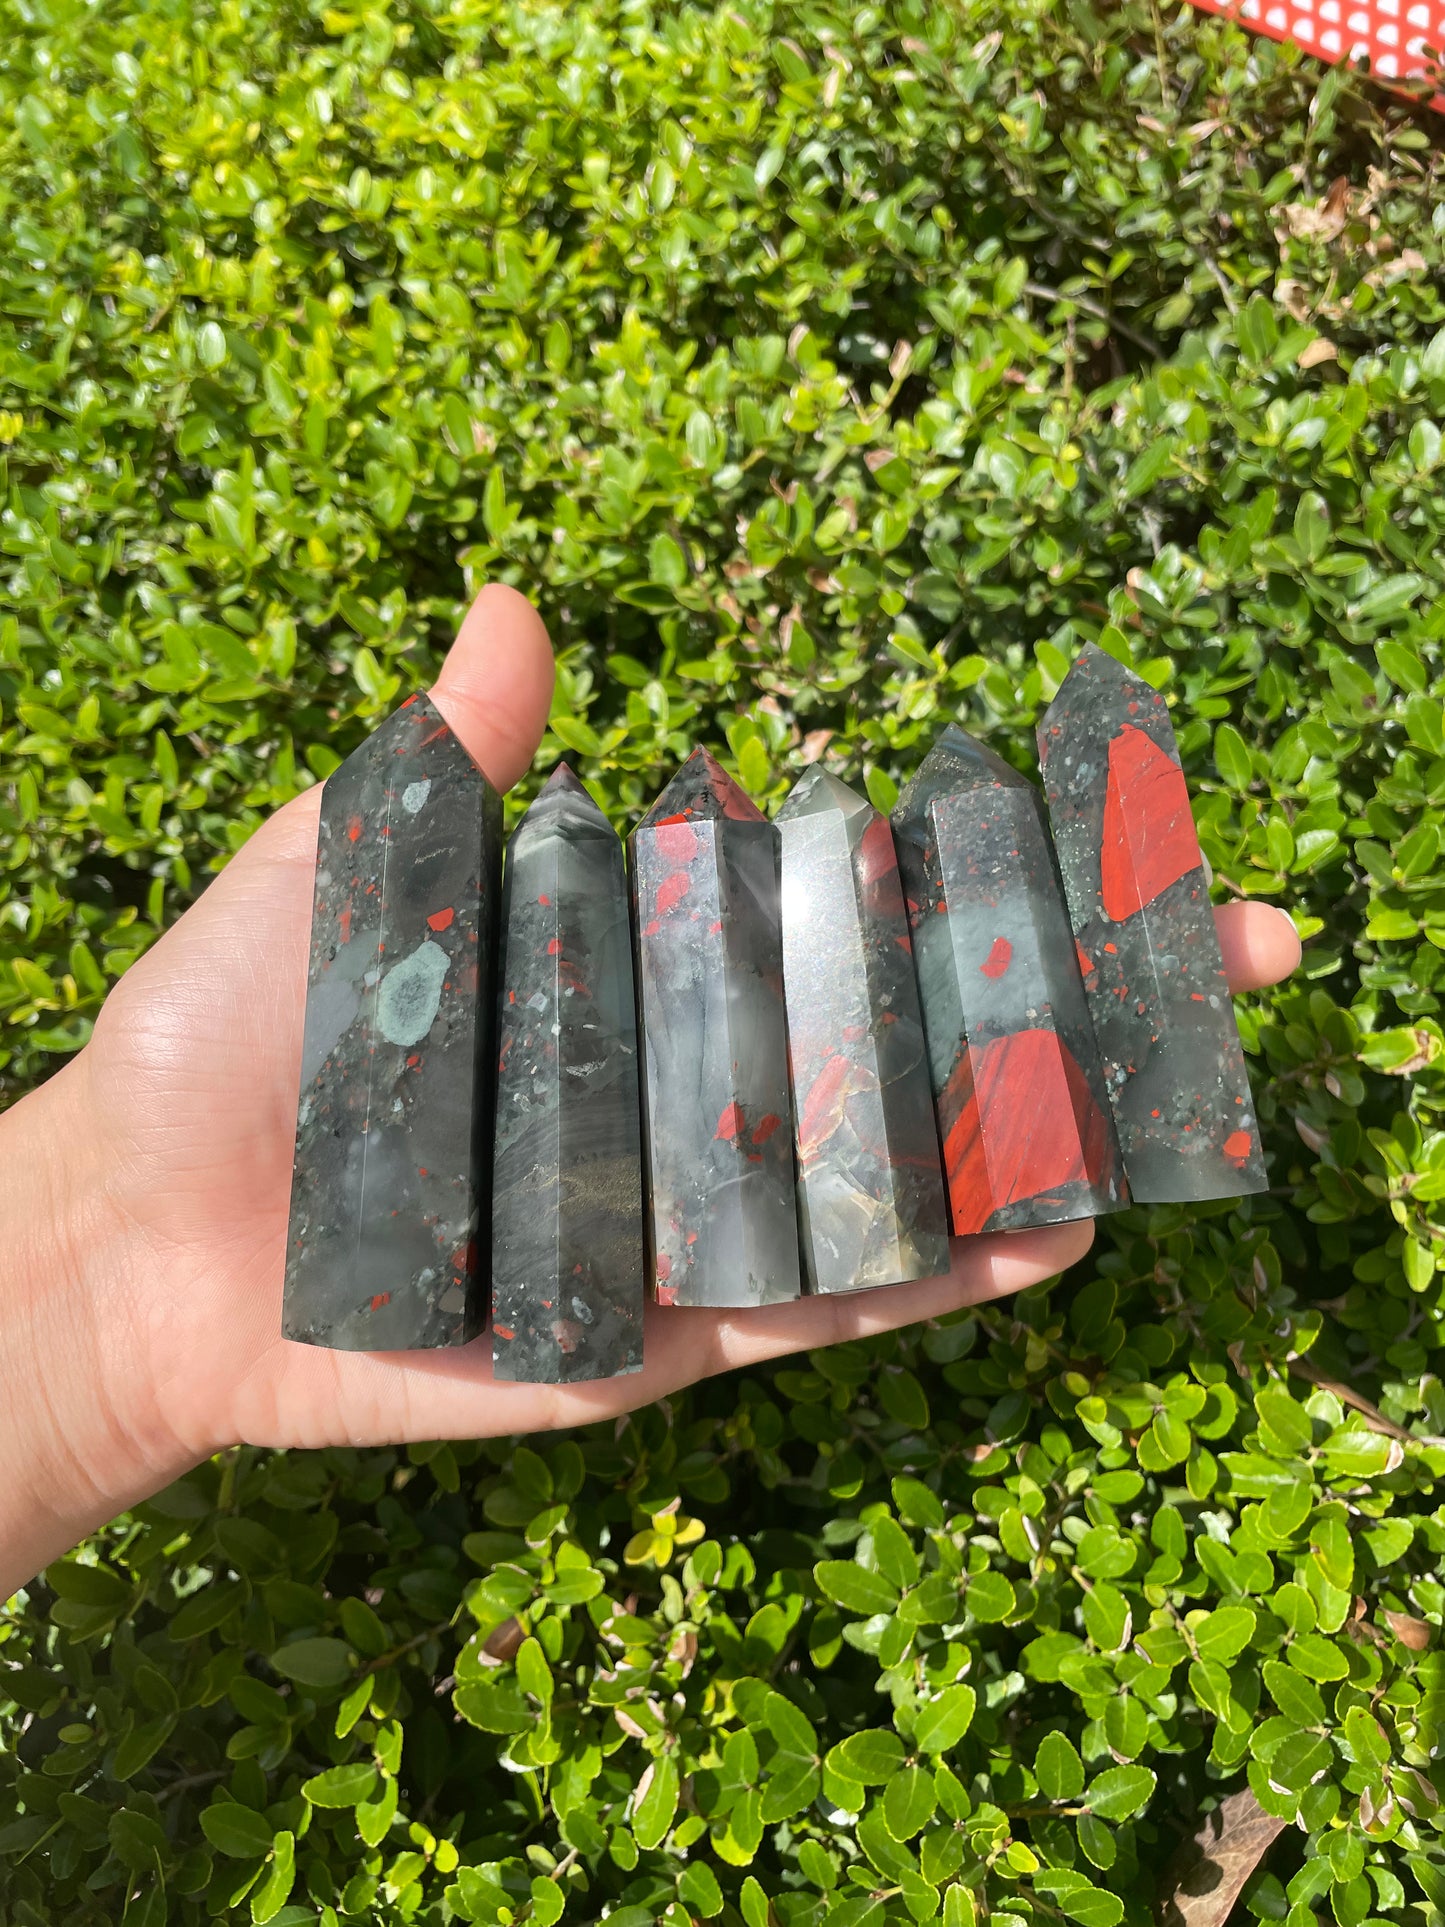 PICK YOUR OWN: Bloodstone Tower